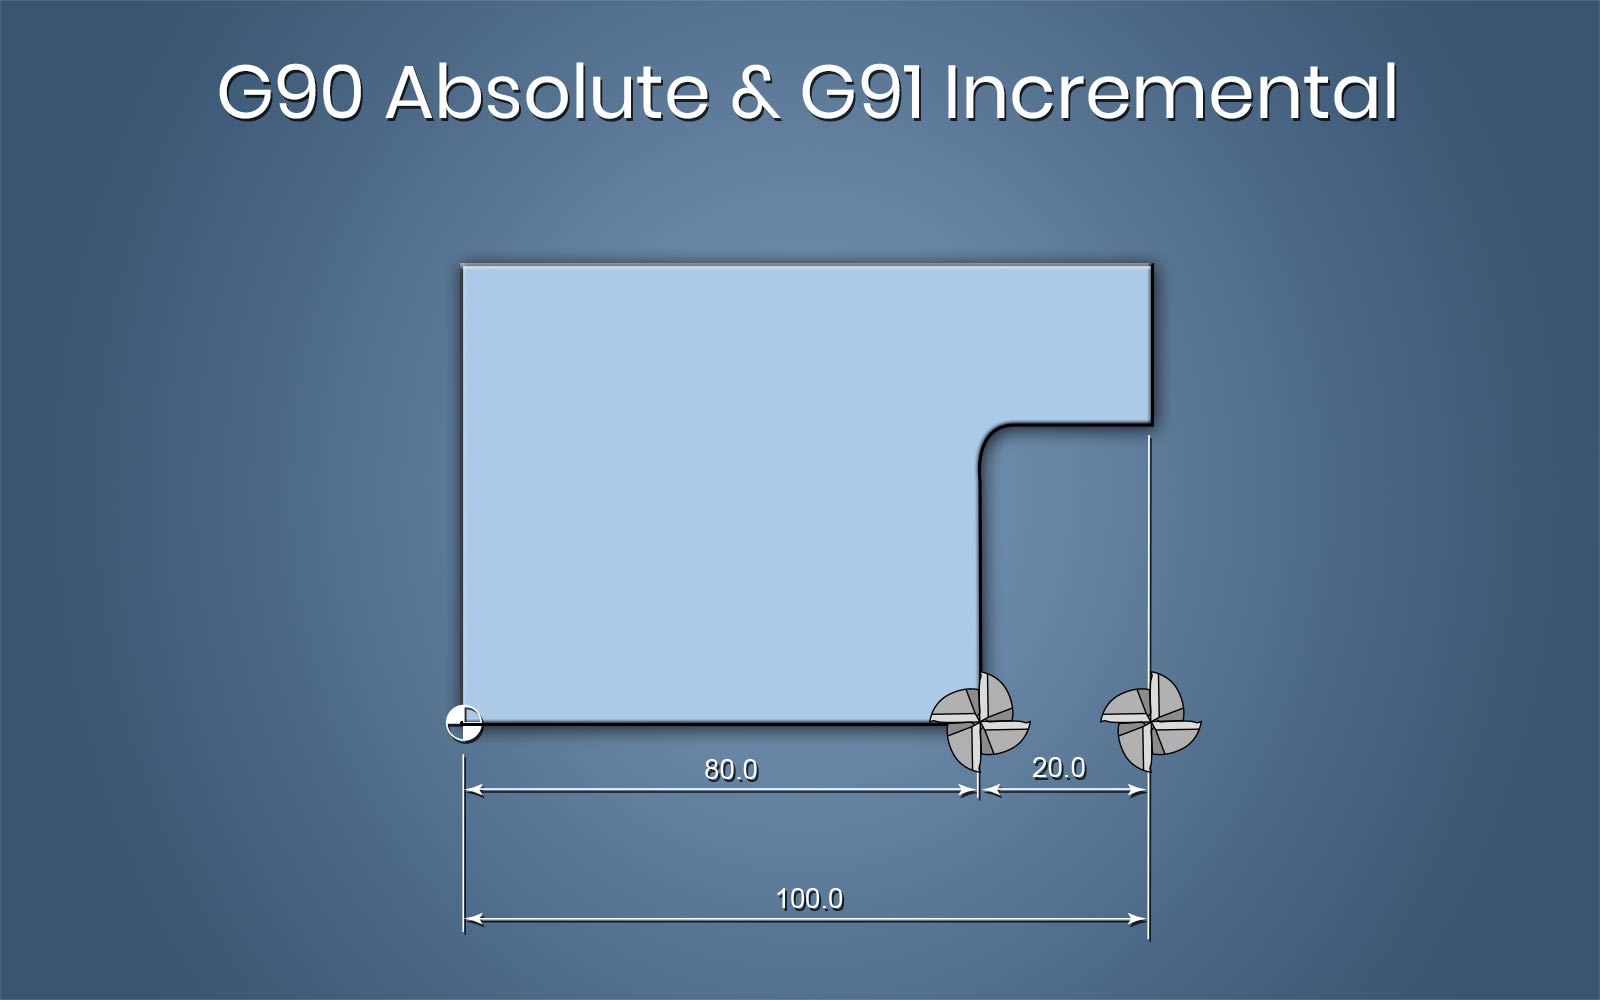 G90 And G91 G Codes Absolute And Incremental